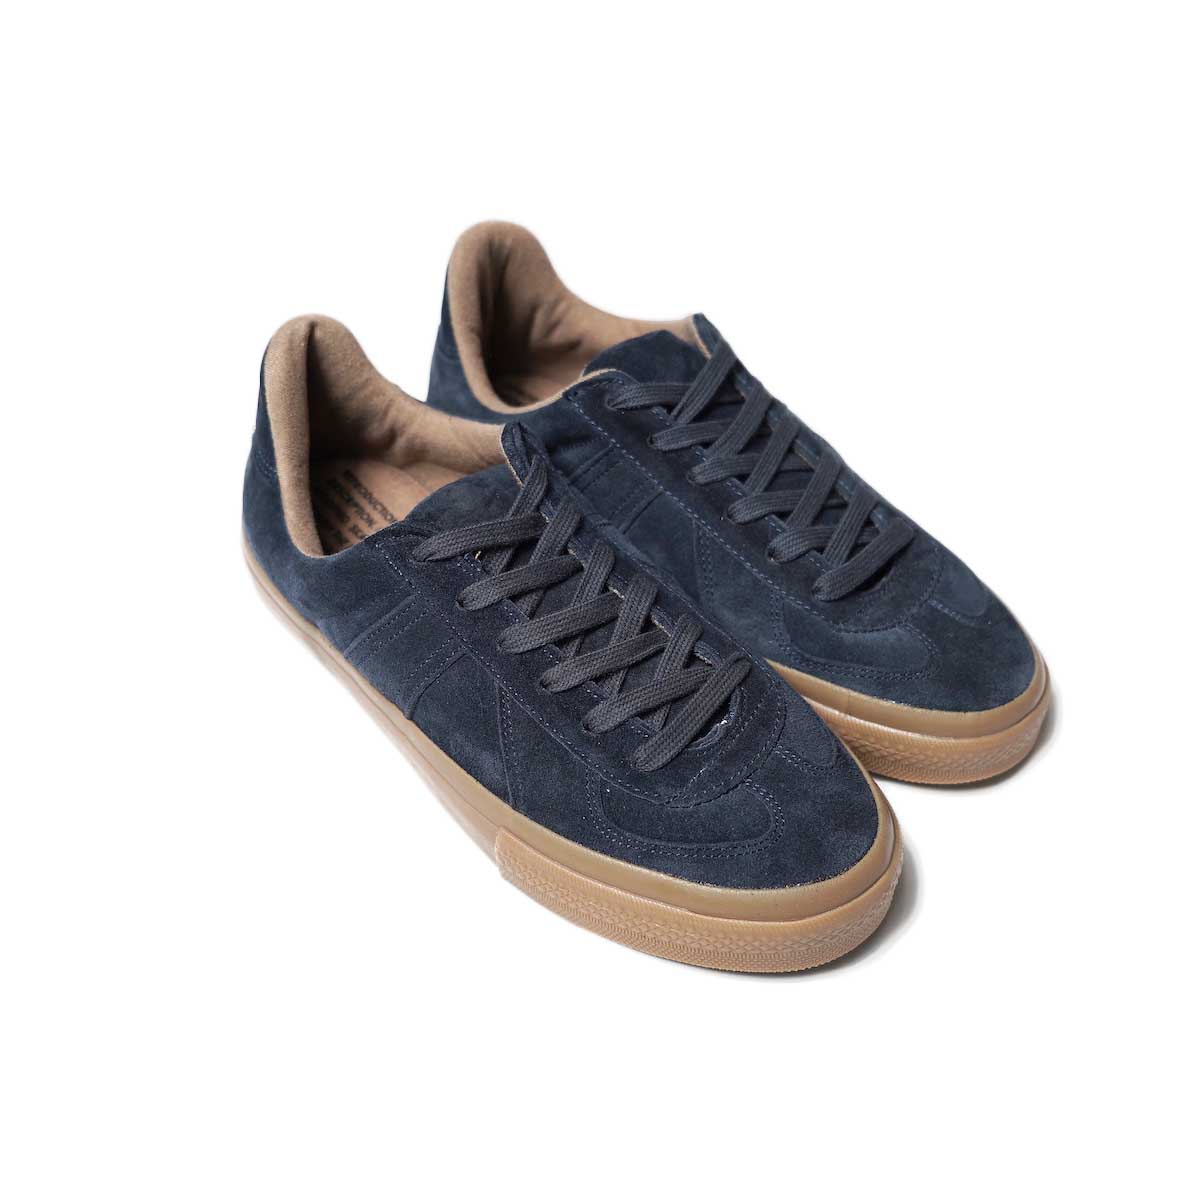 REPRODUCTION OF FOUND / GERMAN MILITARY TRAINER (Dark Navy Suede)